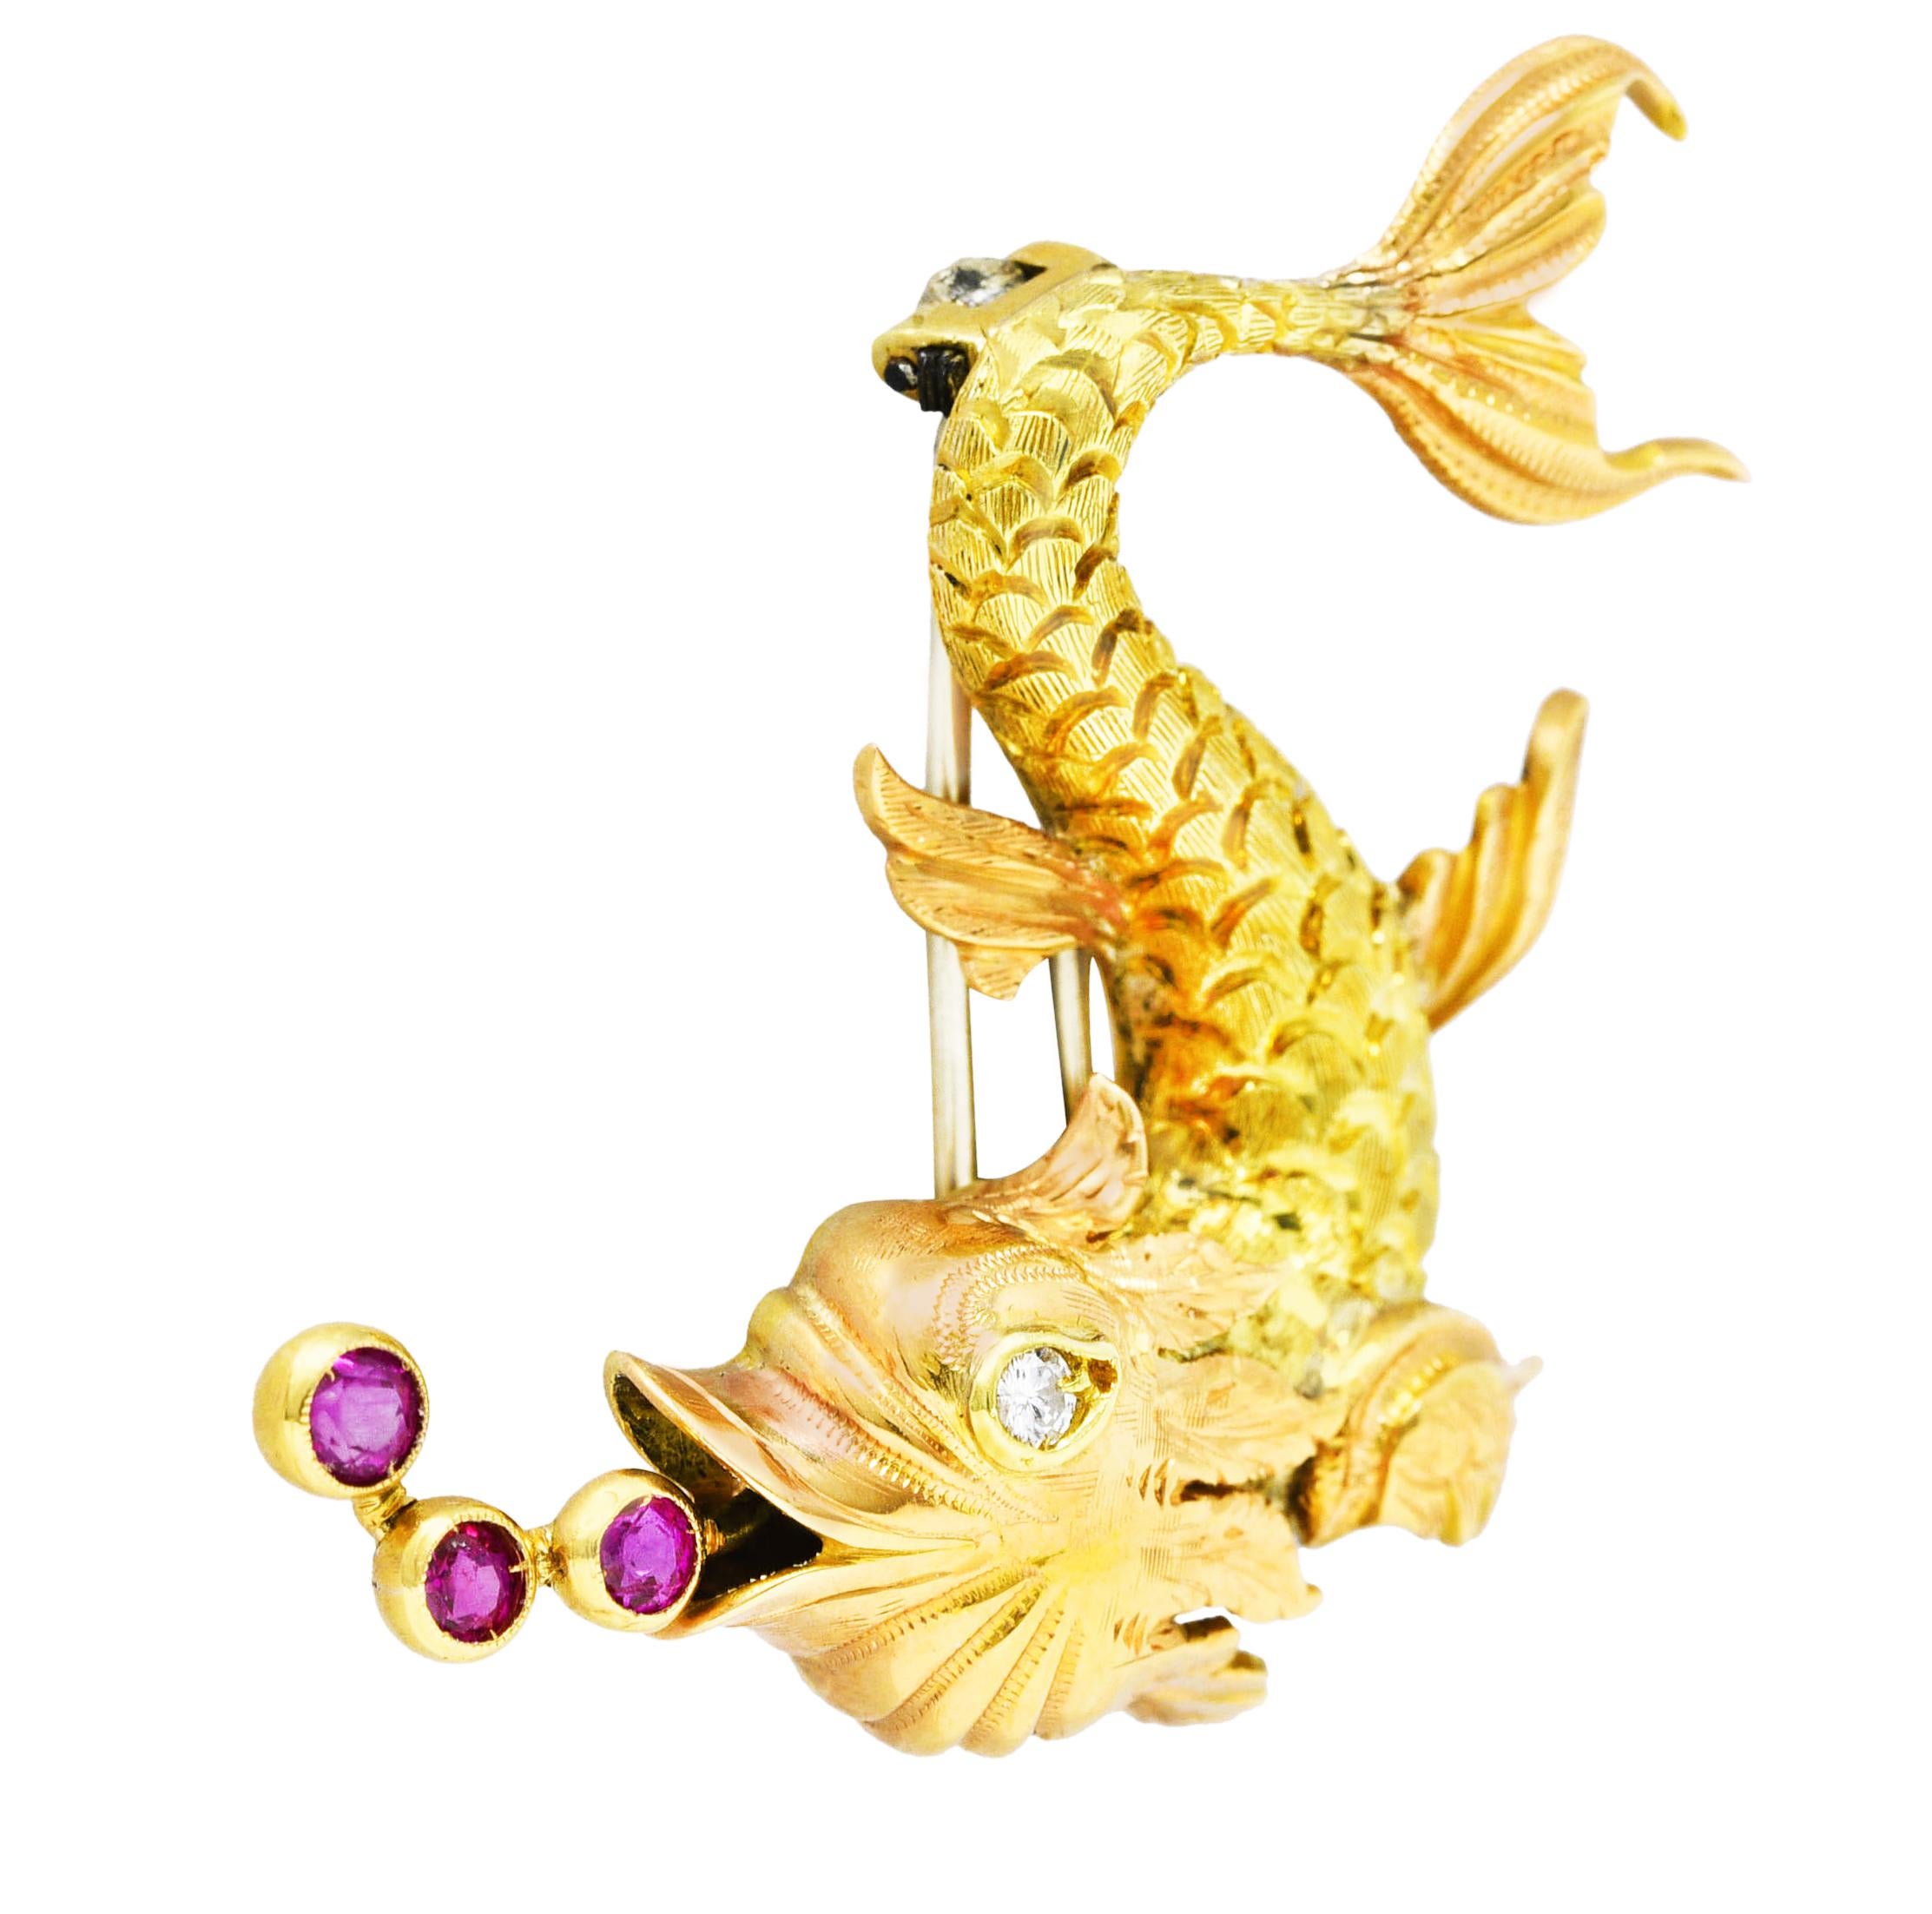 Brooch is designed as a swimming fish featuring a scaled body with fine engraving throughout. Accented by furling rose gold fins and head with bezel set round cut ruby bubbles rising from mouth. Weighing approximately 0.36 carat total - transparent